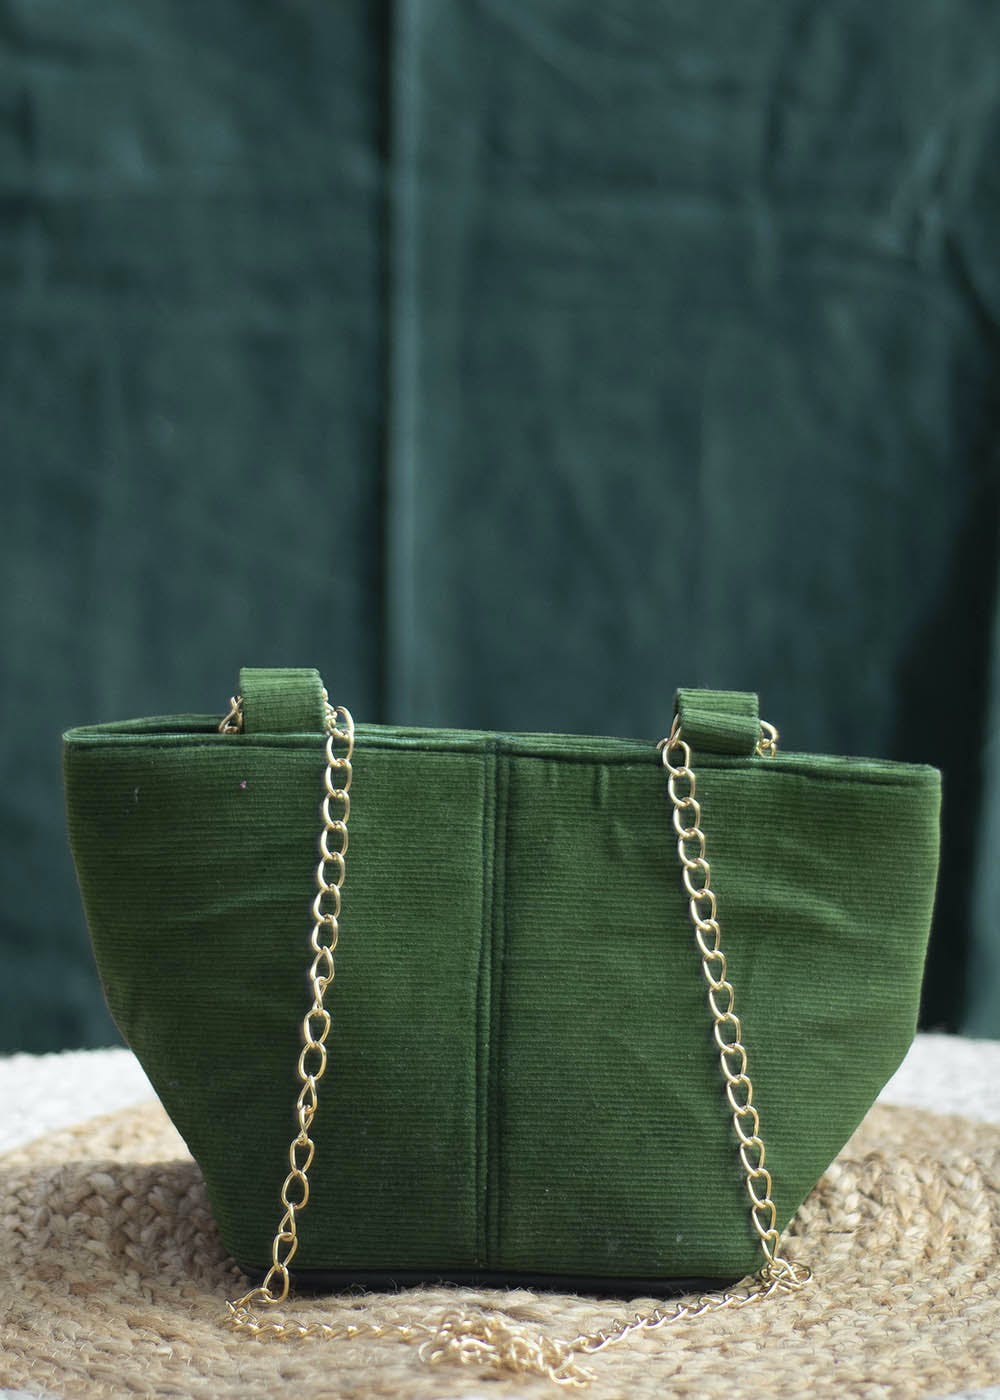 HEIRLOOM DITTY BAG – Wren and Ivy